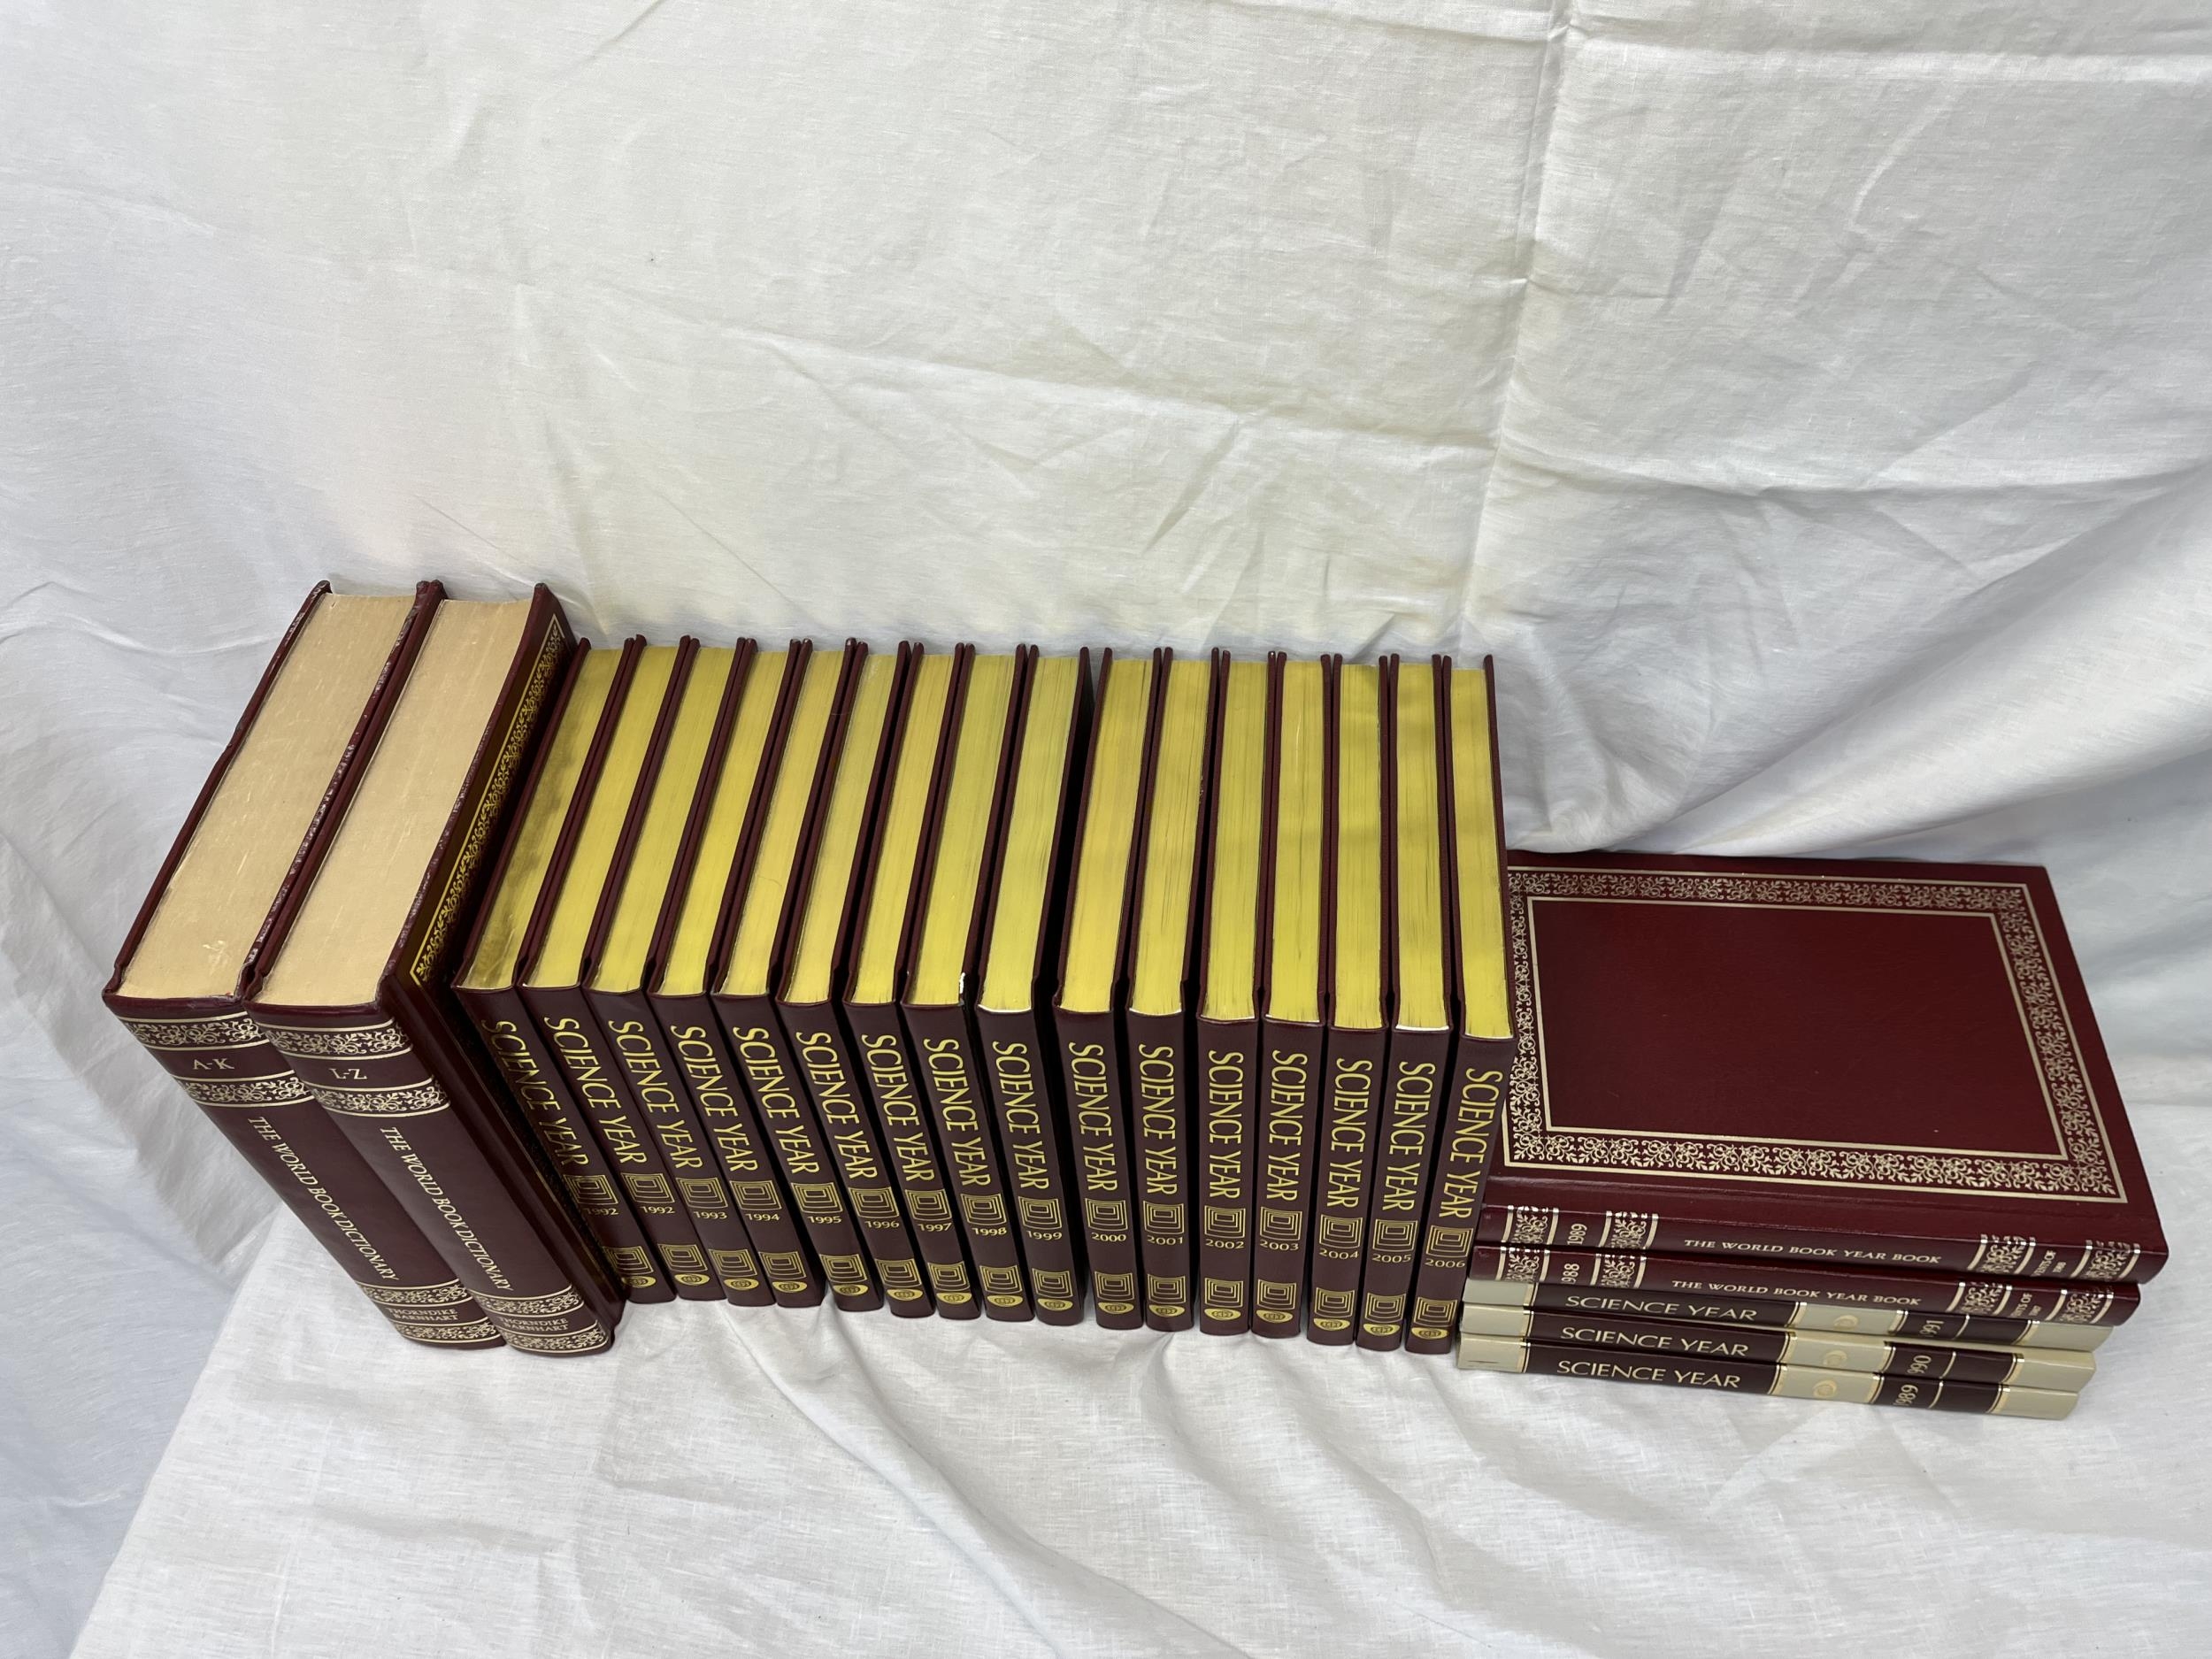 The World Book Dictionary and The Science Year Book, 4 sets. H.28.5cm. (Largest) - Image 4 of 4